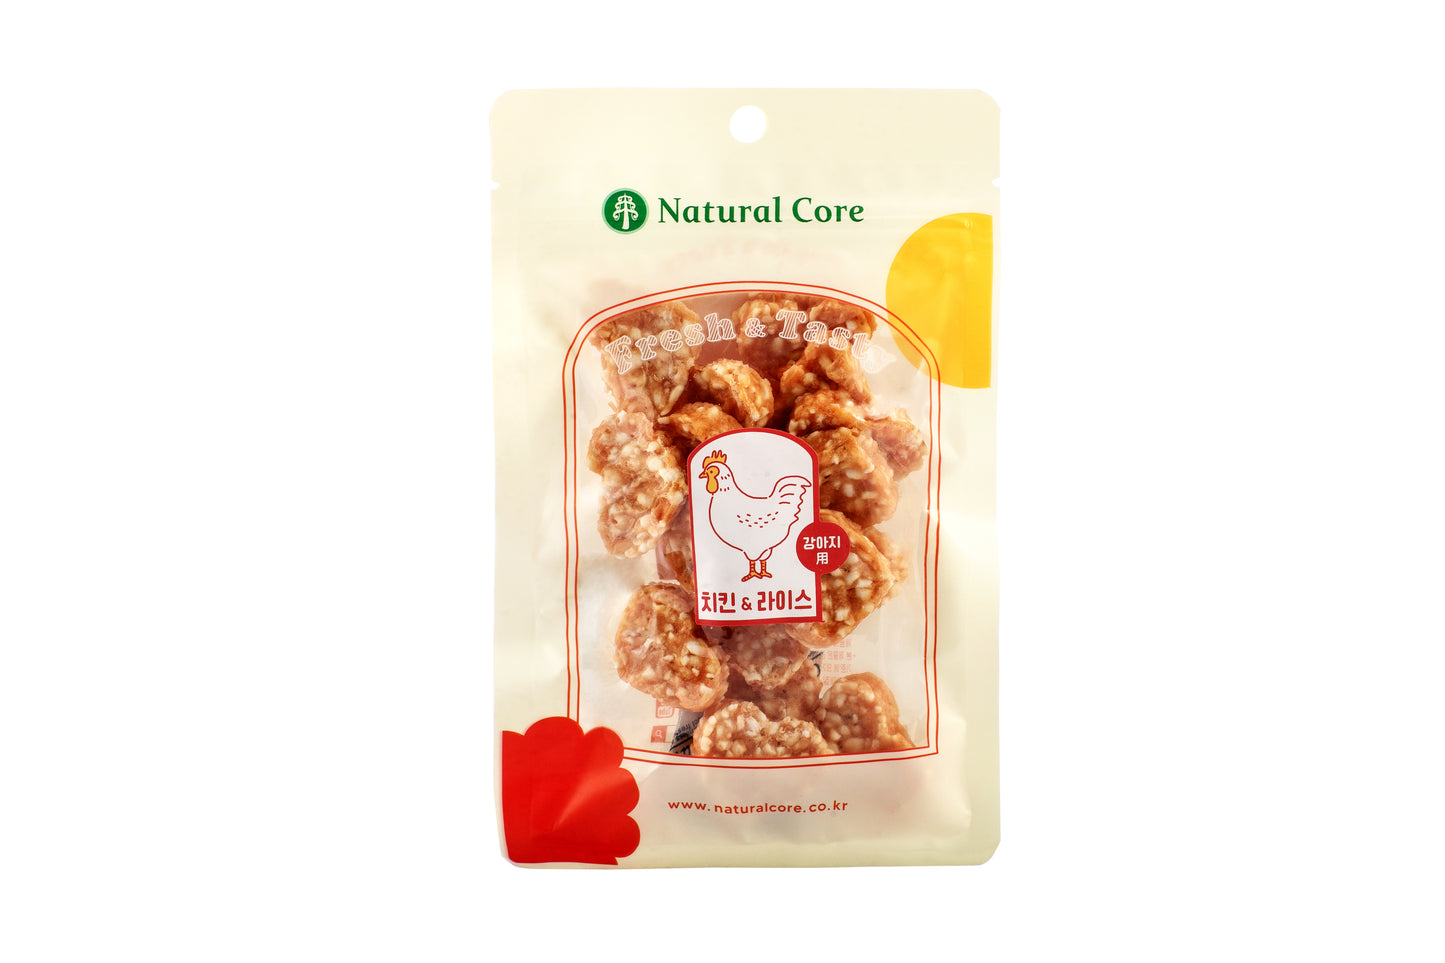 [Natural Core] Chicken & Rice Delight 100g: Wholesome and Adorable Treat for Dogs of All Ages!